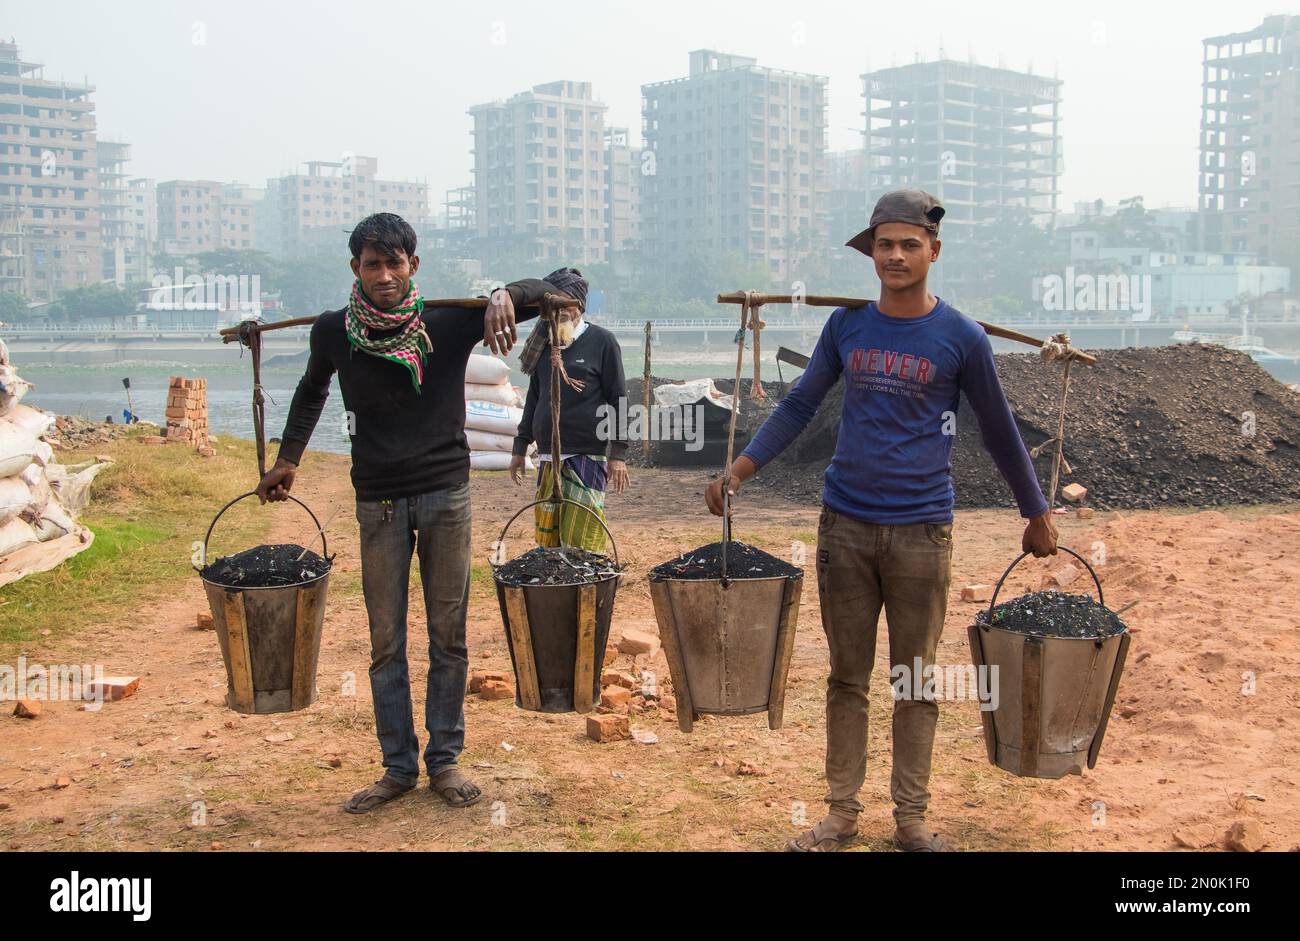 People are working hard in the brick field. This image was taken from Bosela, Bangladesh on December 30, 2022 Stock Photo